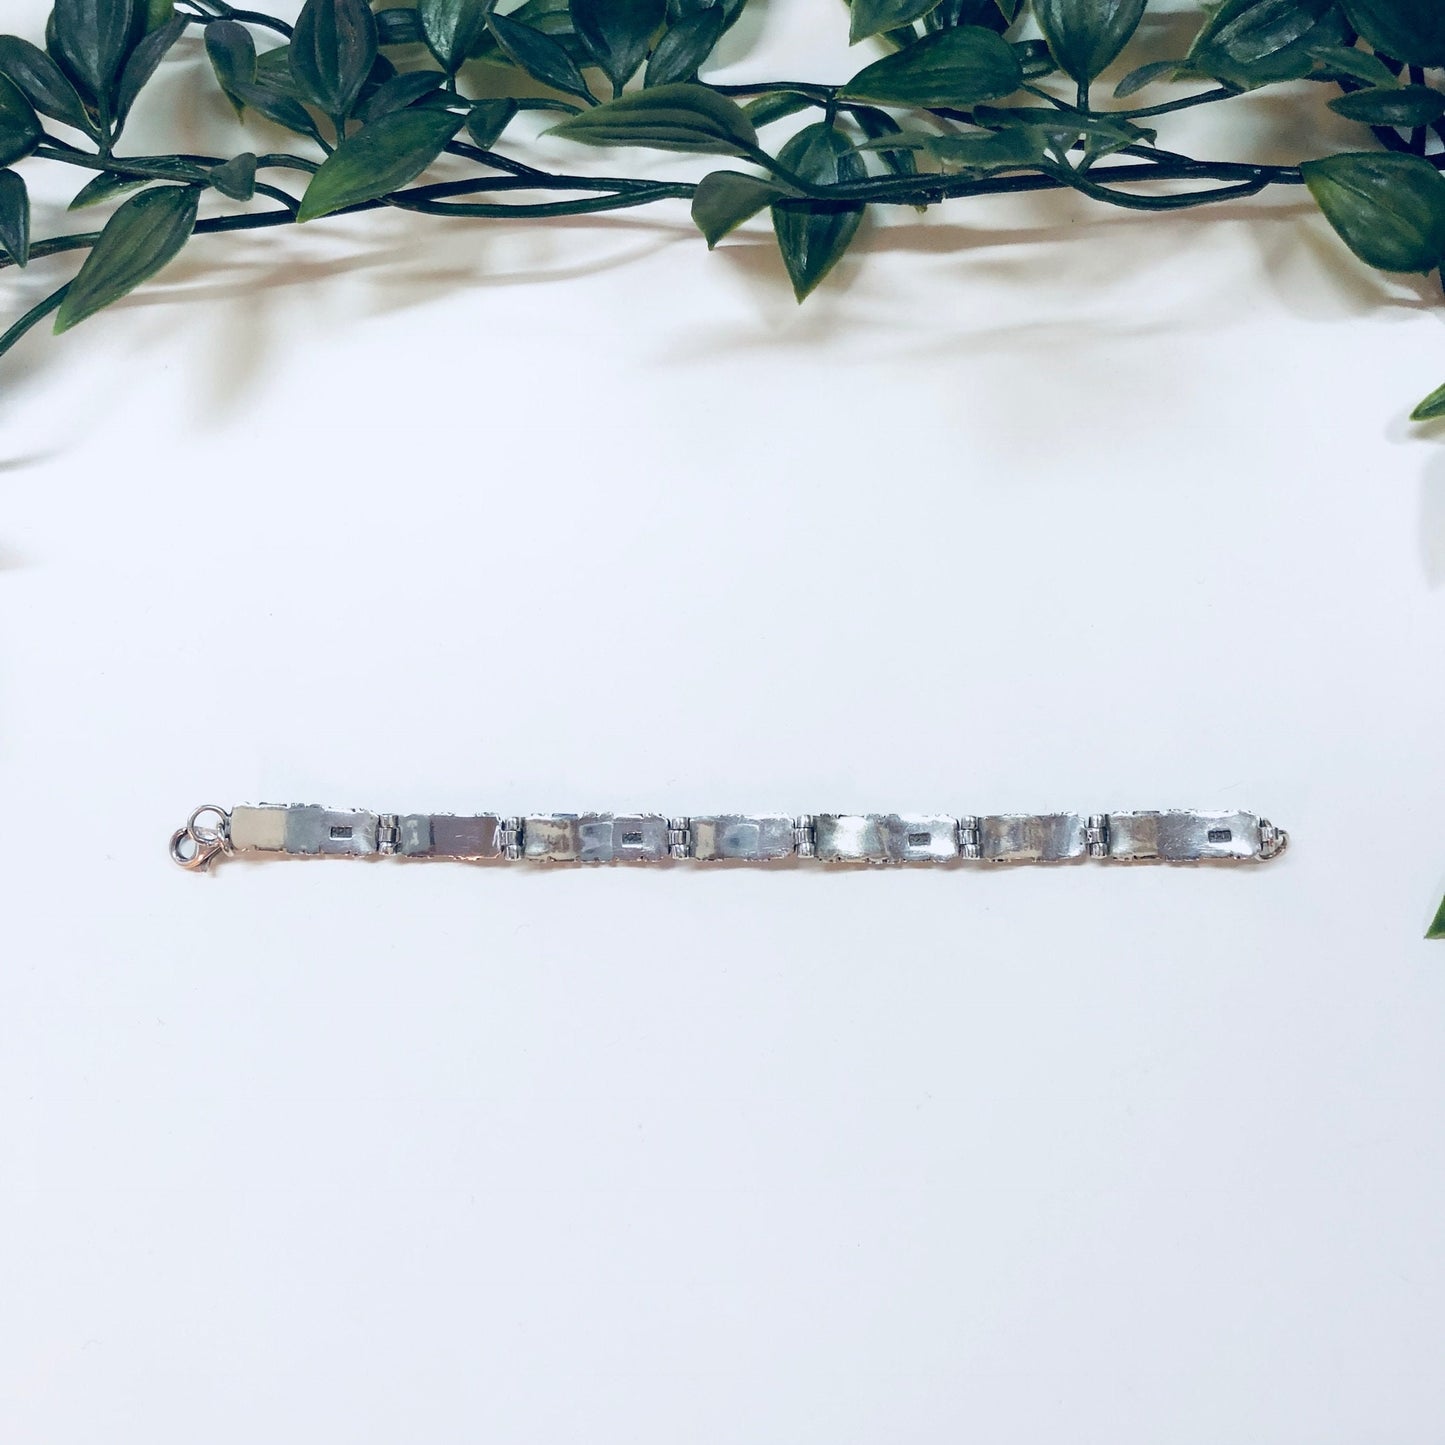 Vintage silver and gold link bracelet with inlay, sterling silver 925, ideal for anniversary gift, displayed against a white background with green foliage.